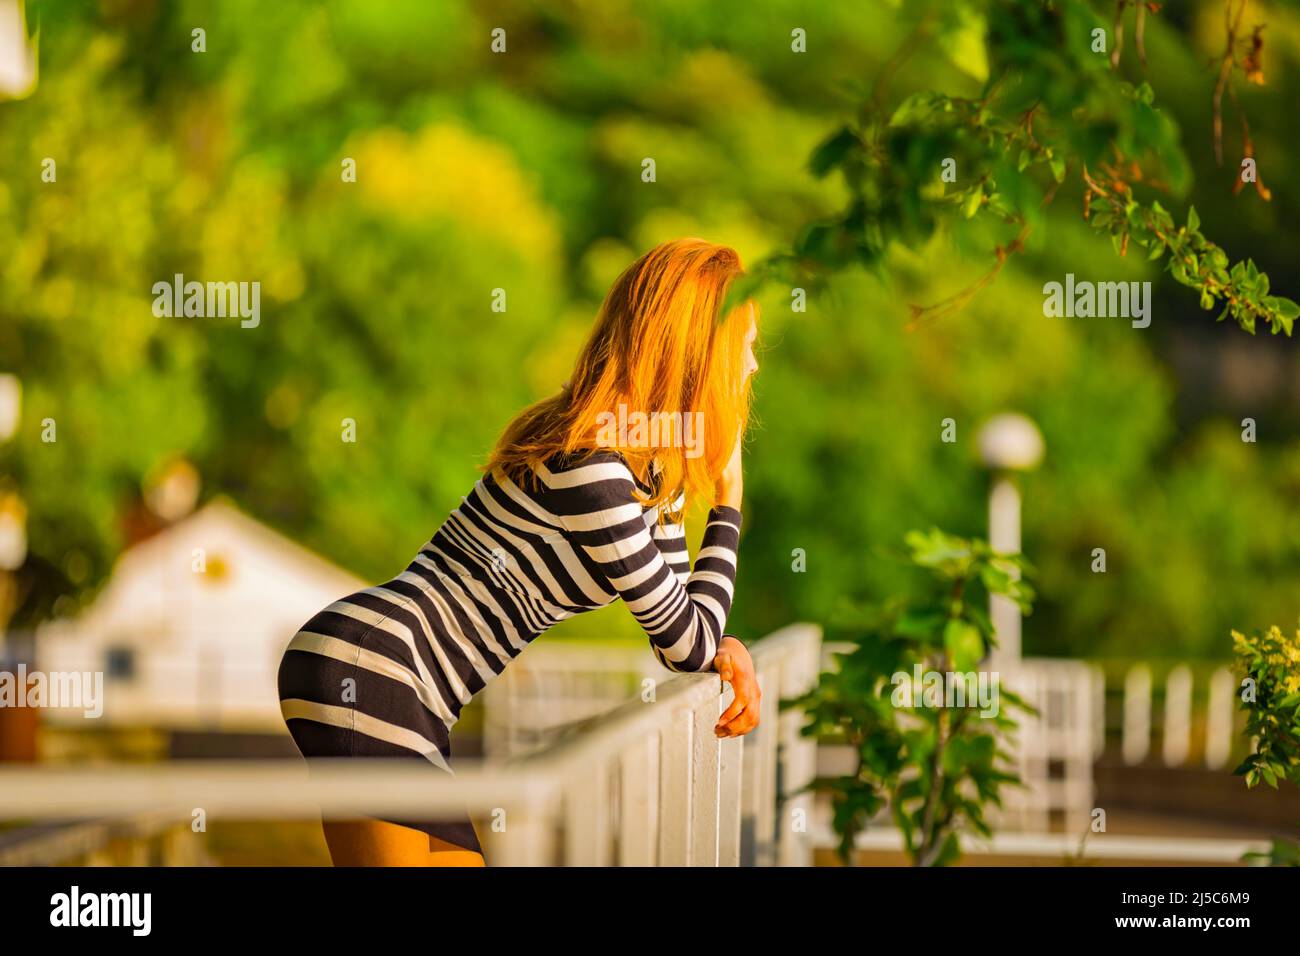 Adolescent teen girl bending bend over bendover inclined on fence in park golden hair blonde prone posture Stock Photo